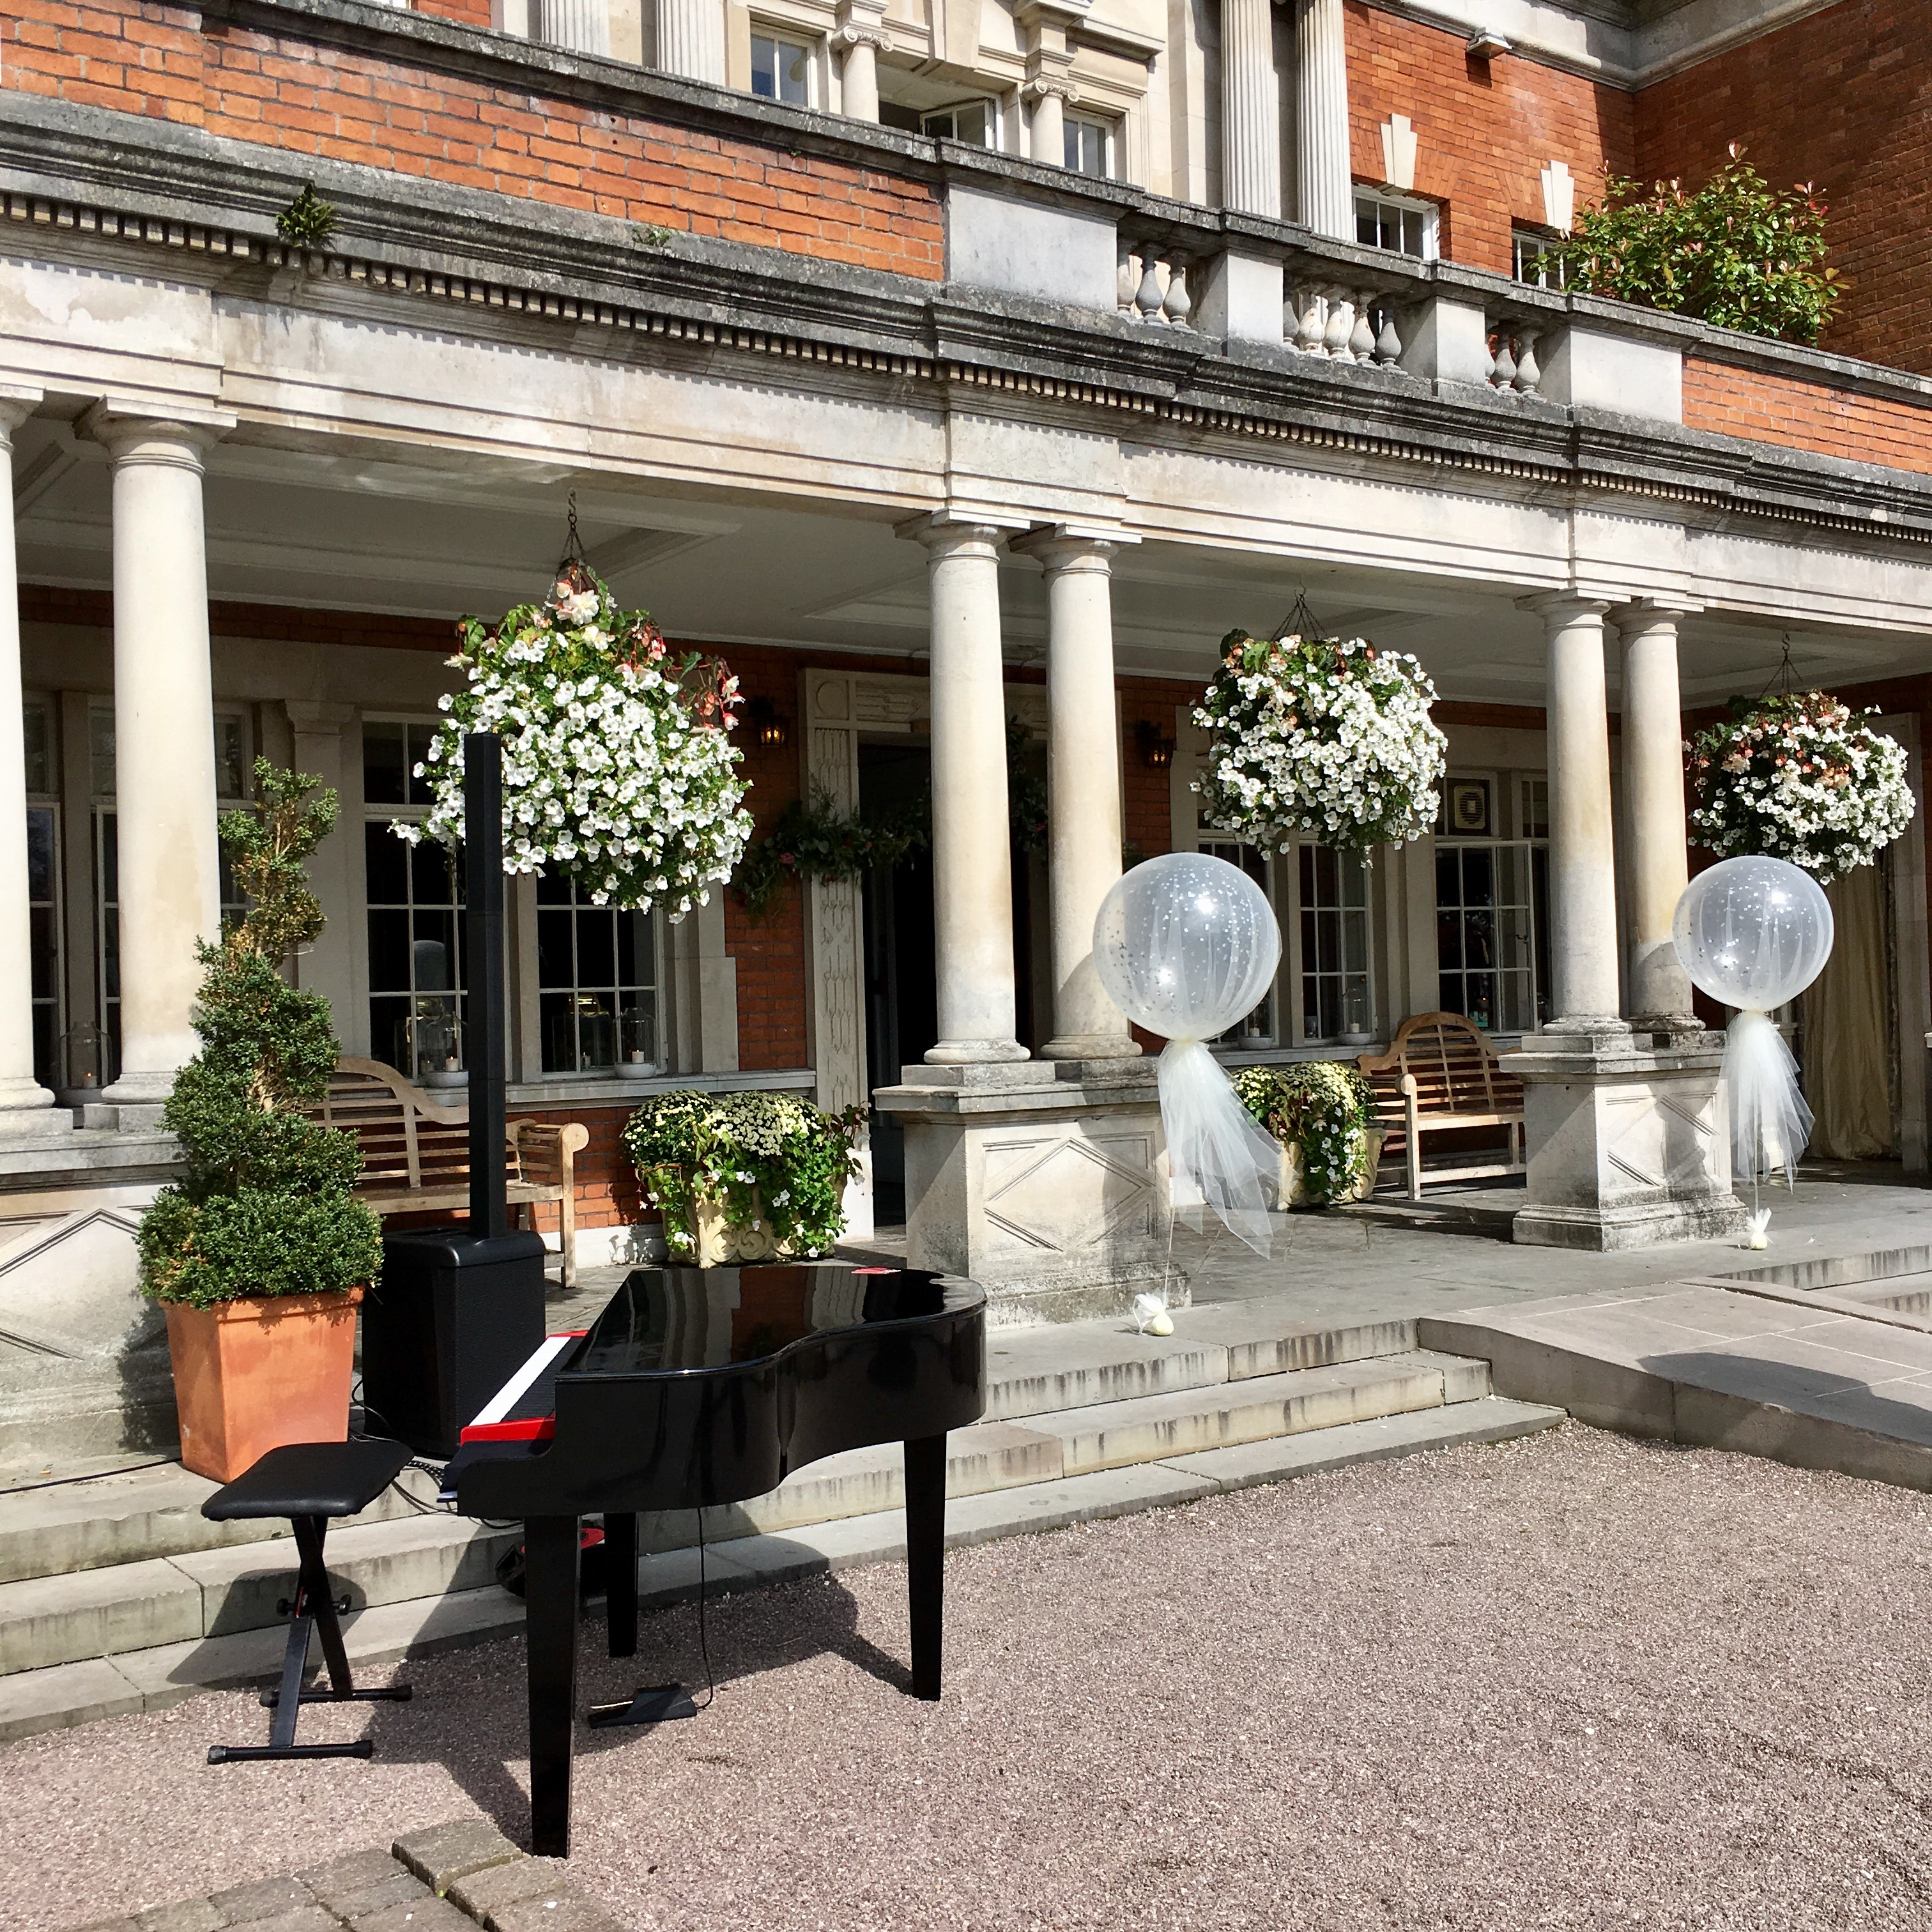 Craig Smith Wedding Pianist playing Piano for Eaves Hall Outside Drinks Reception